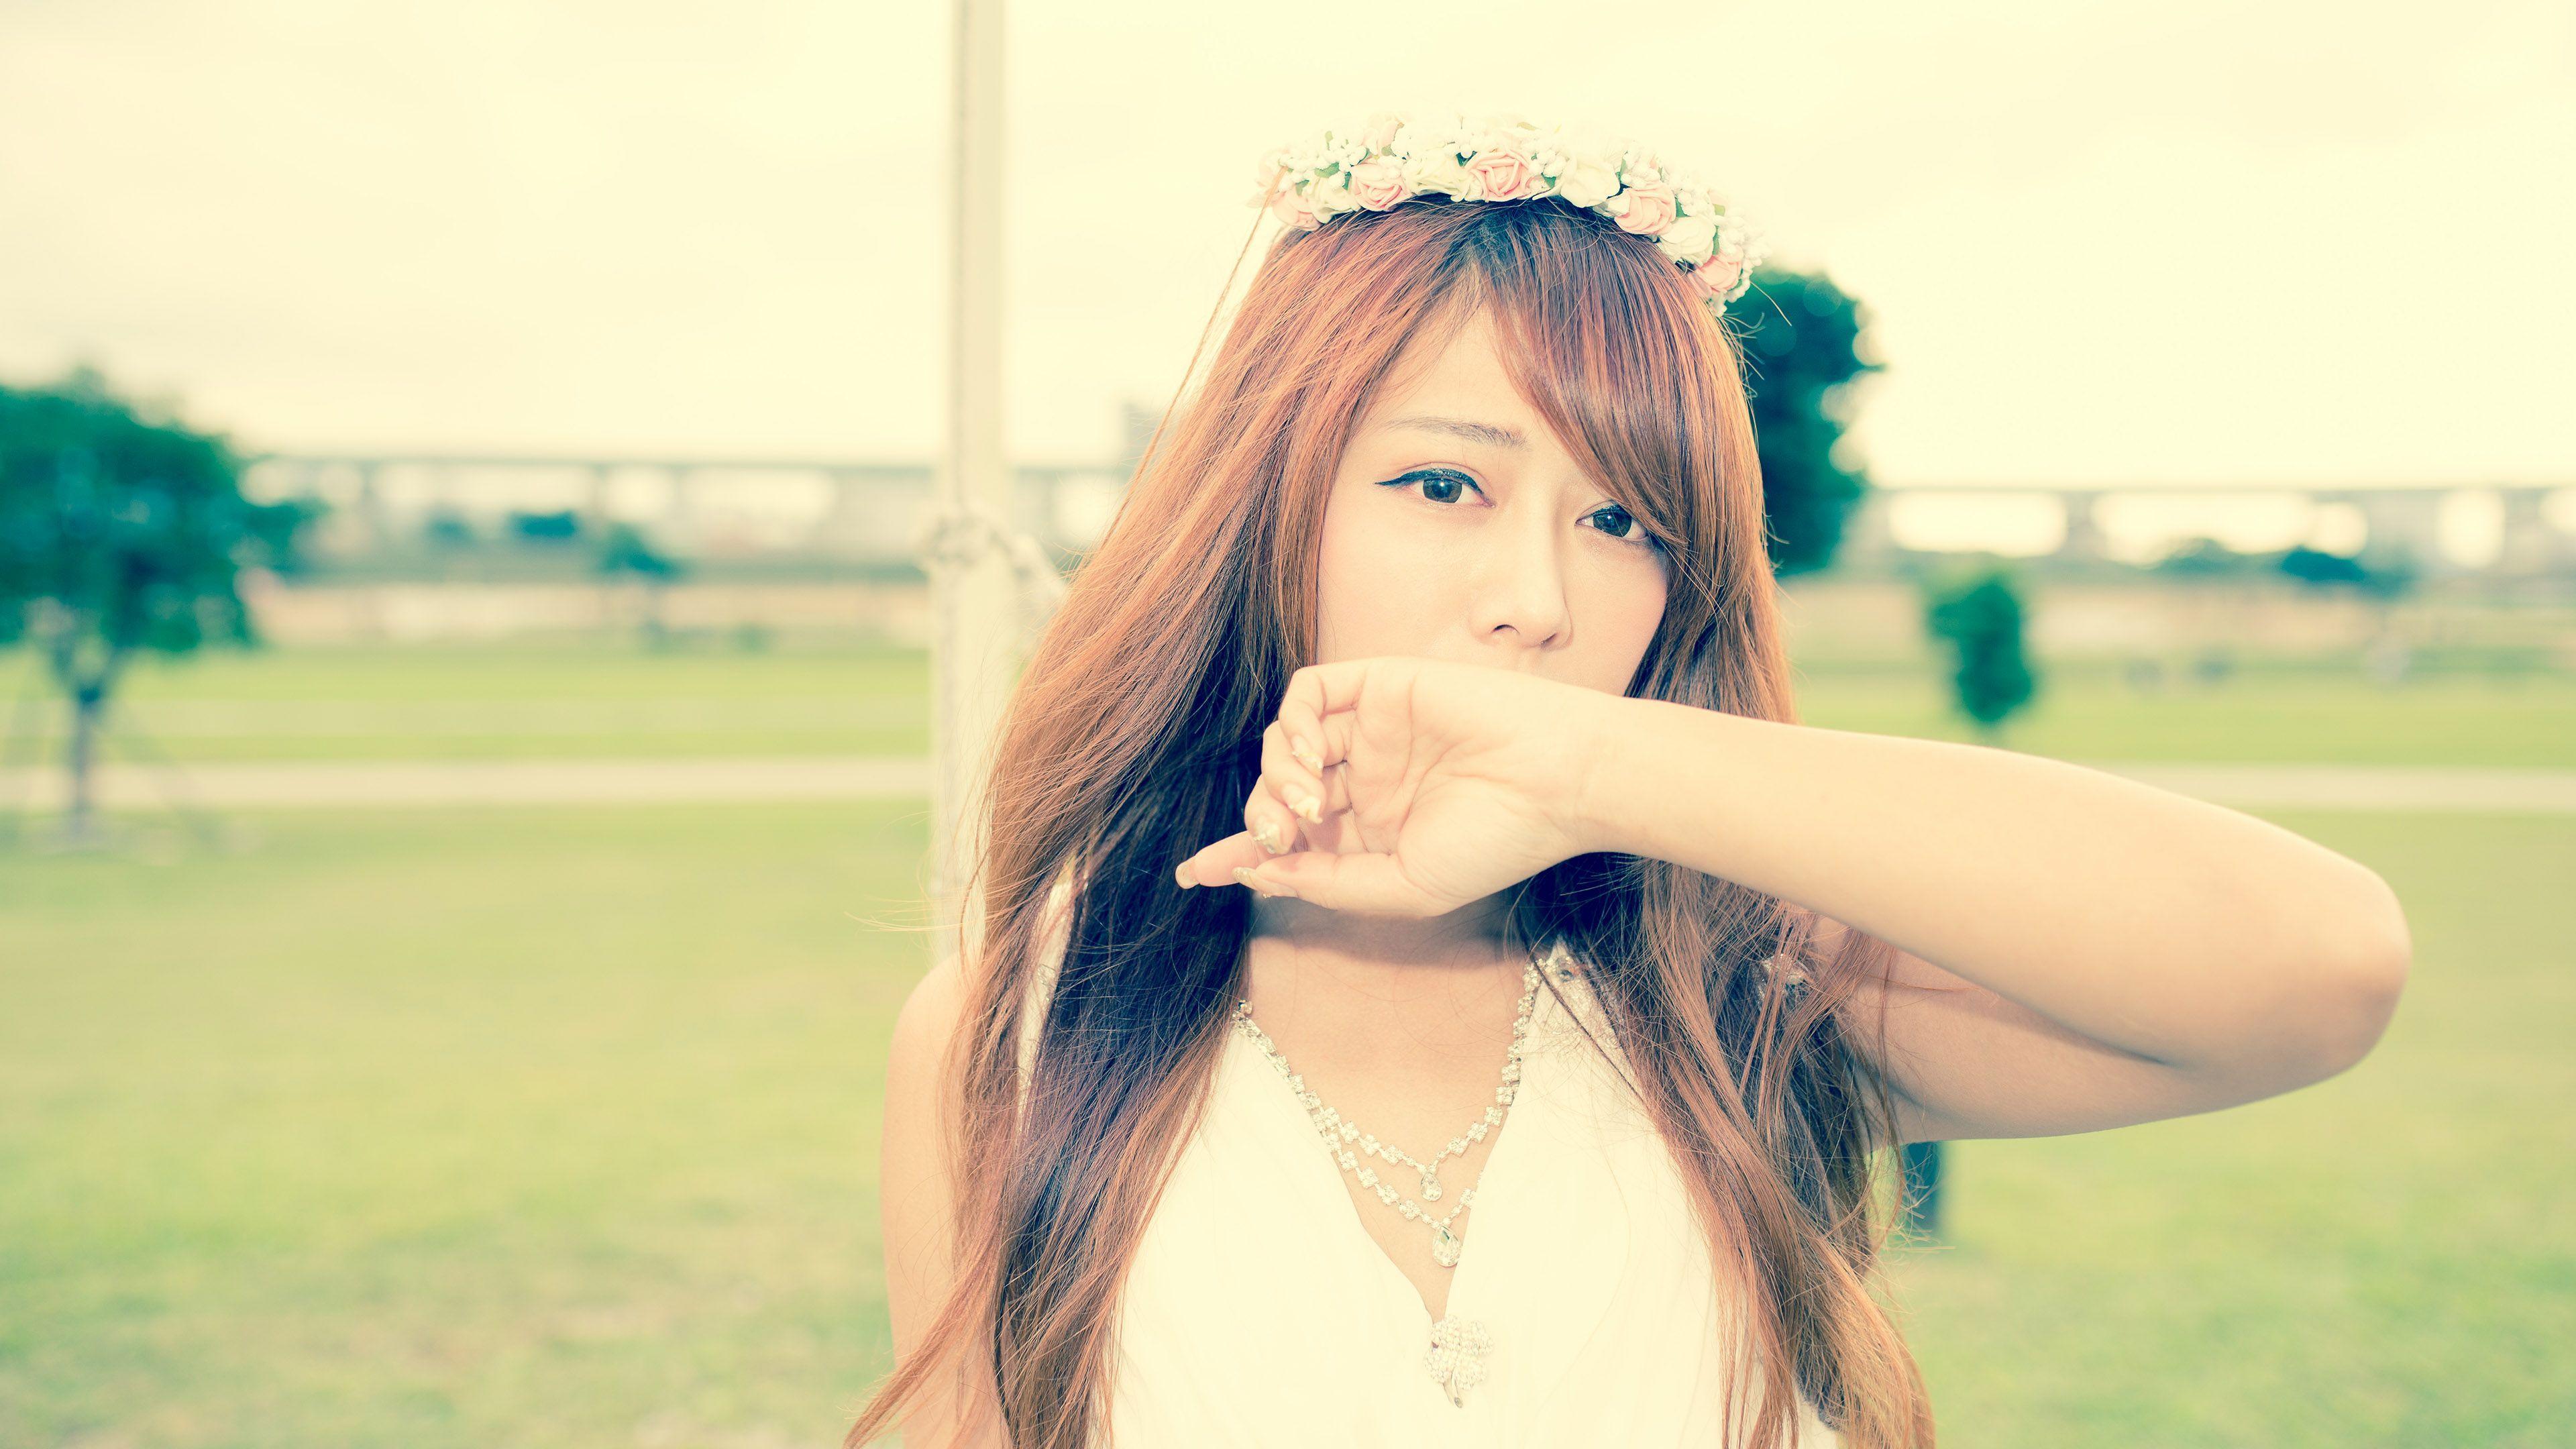 Hd Xiao Xi With A Floral Crown Wallpaper - Aspect Ratio - HD Wallpaper 